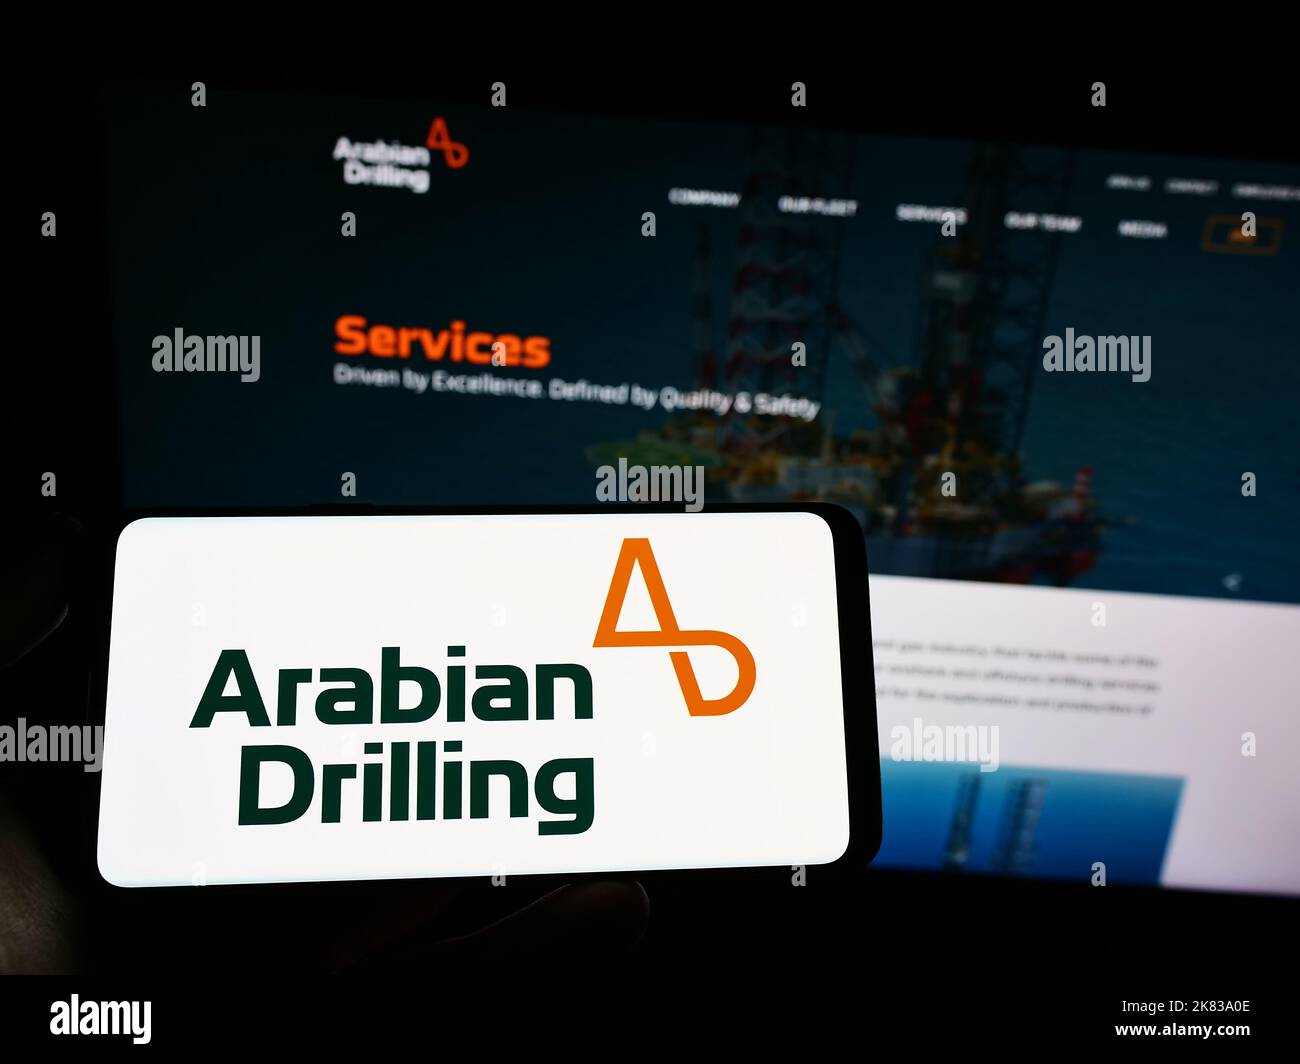 Person holding cellphone with logo of Saudi business Arabian Drilling Company (ADC) on screen in front of webpage. Focus on phone display. Stock Photo